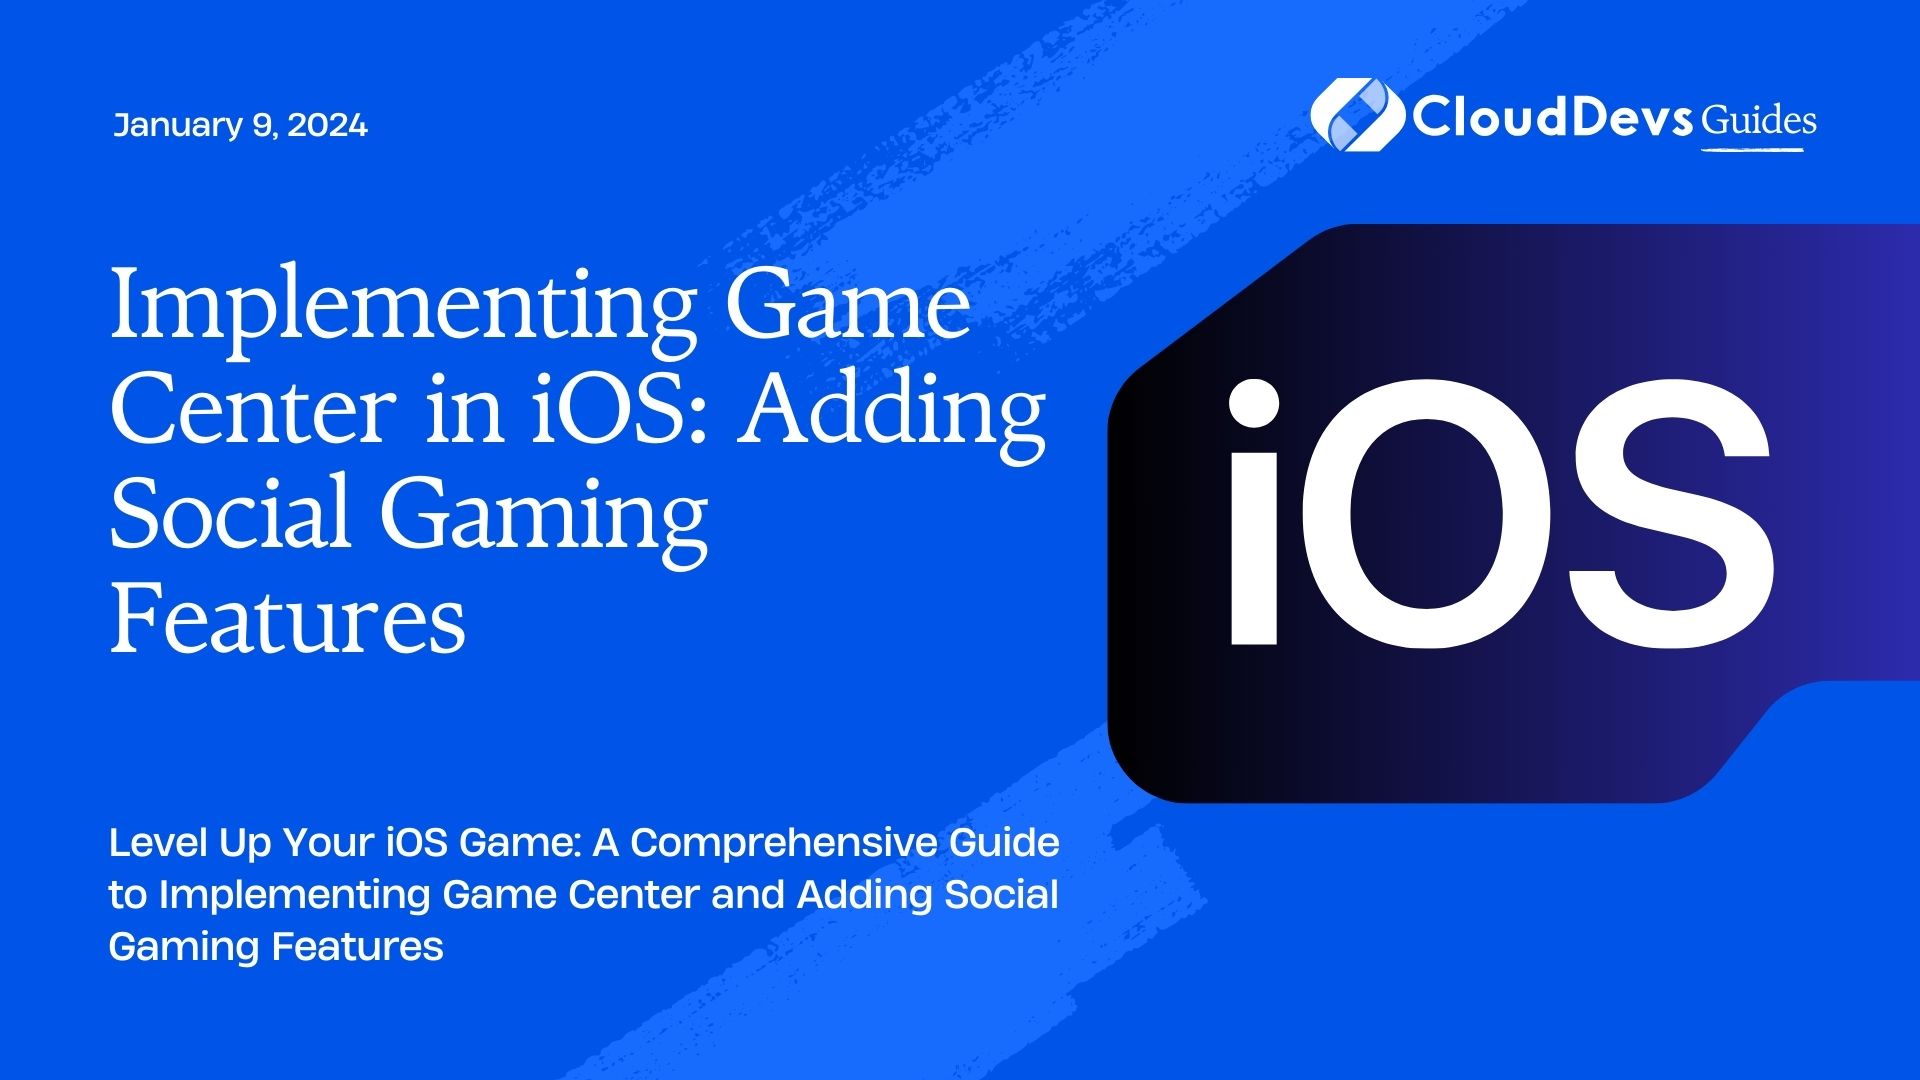 Implementing Game Center in iOS: Adding Social Gaming Features